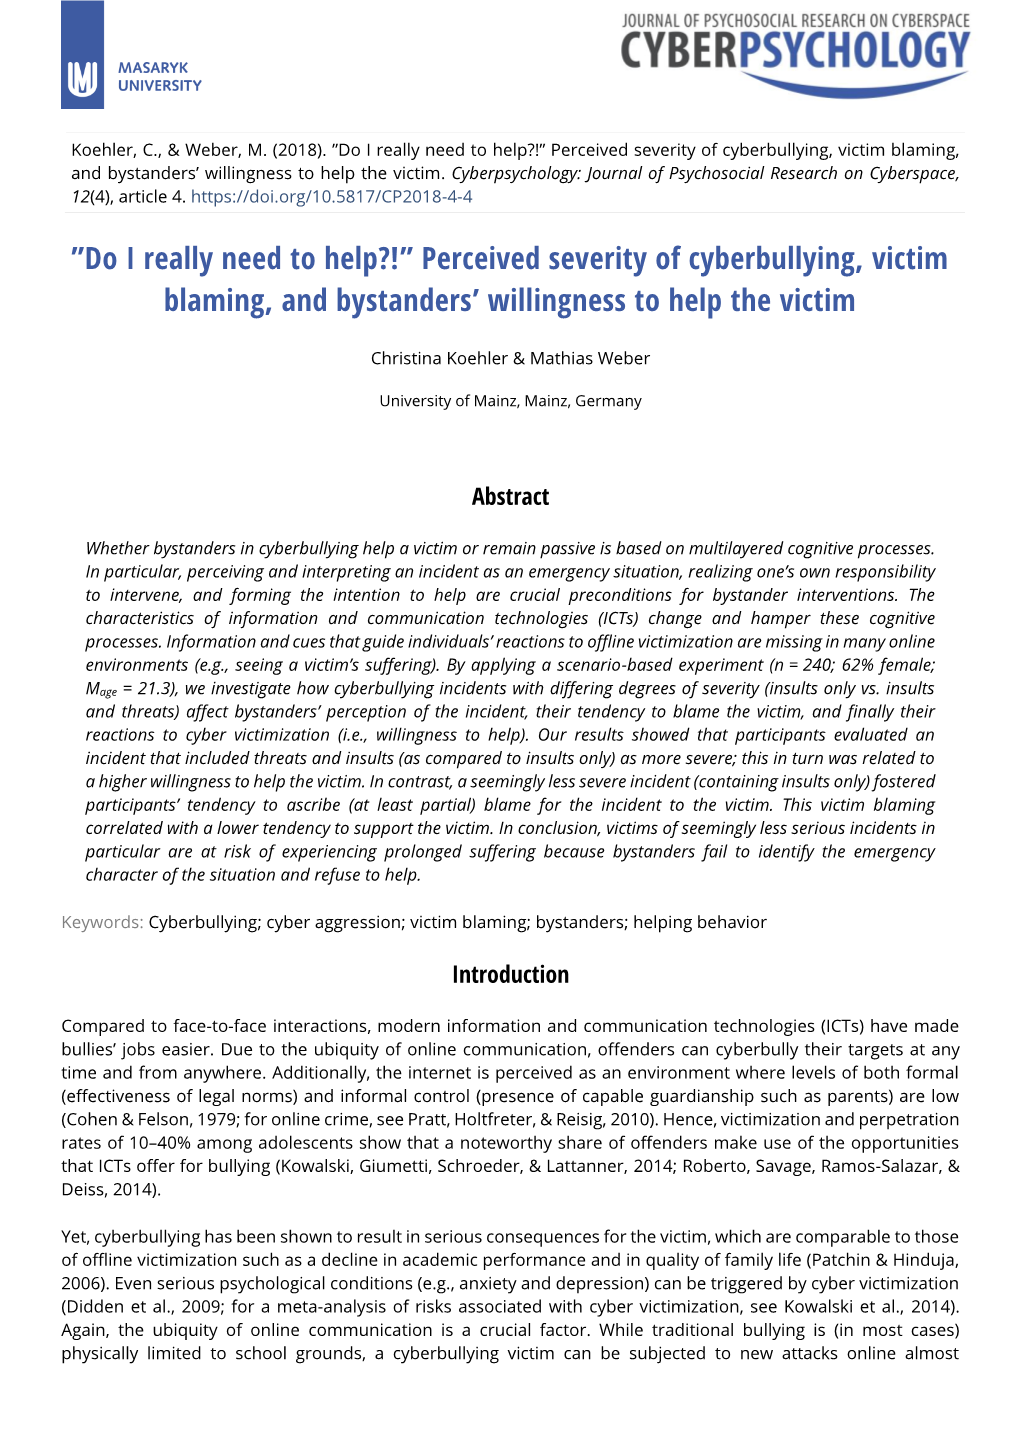 Perceived Severity of Cyberbullying, Victim Blaming, and Bystanders’ Willingness to Help the Victim